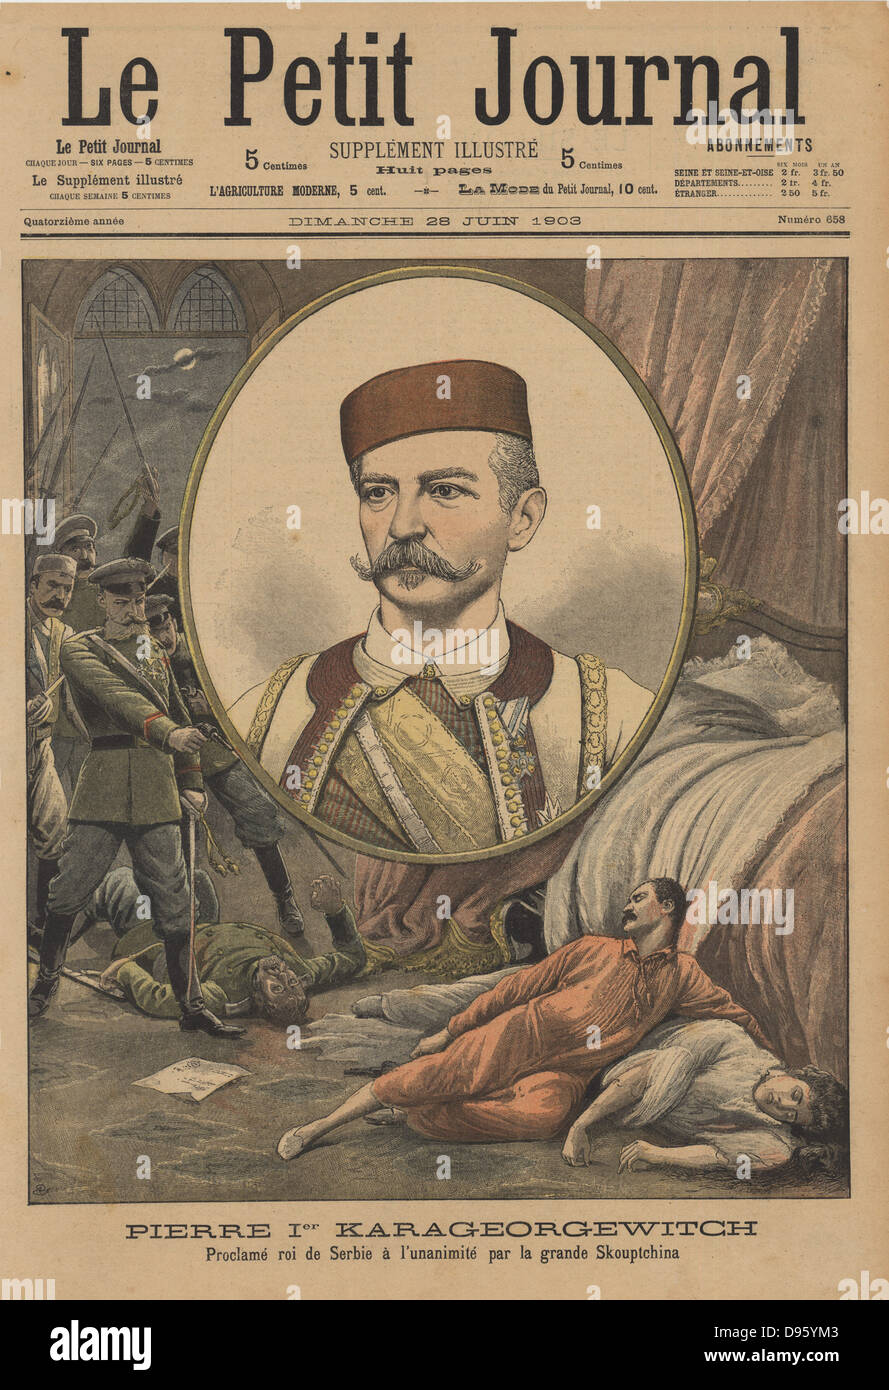 Peter I  (1844-1921) declared King of Serbia after the assassination of Alexander and his wife Queen Draga on 11 June 1903. Peter reigned until 1918. From 'Le Petit Journal', Paris, 28 June 1903. Stock Photo